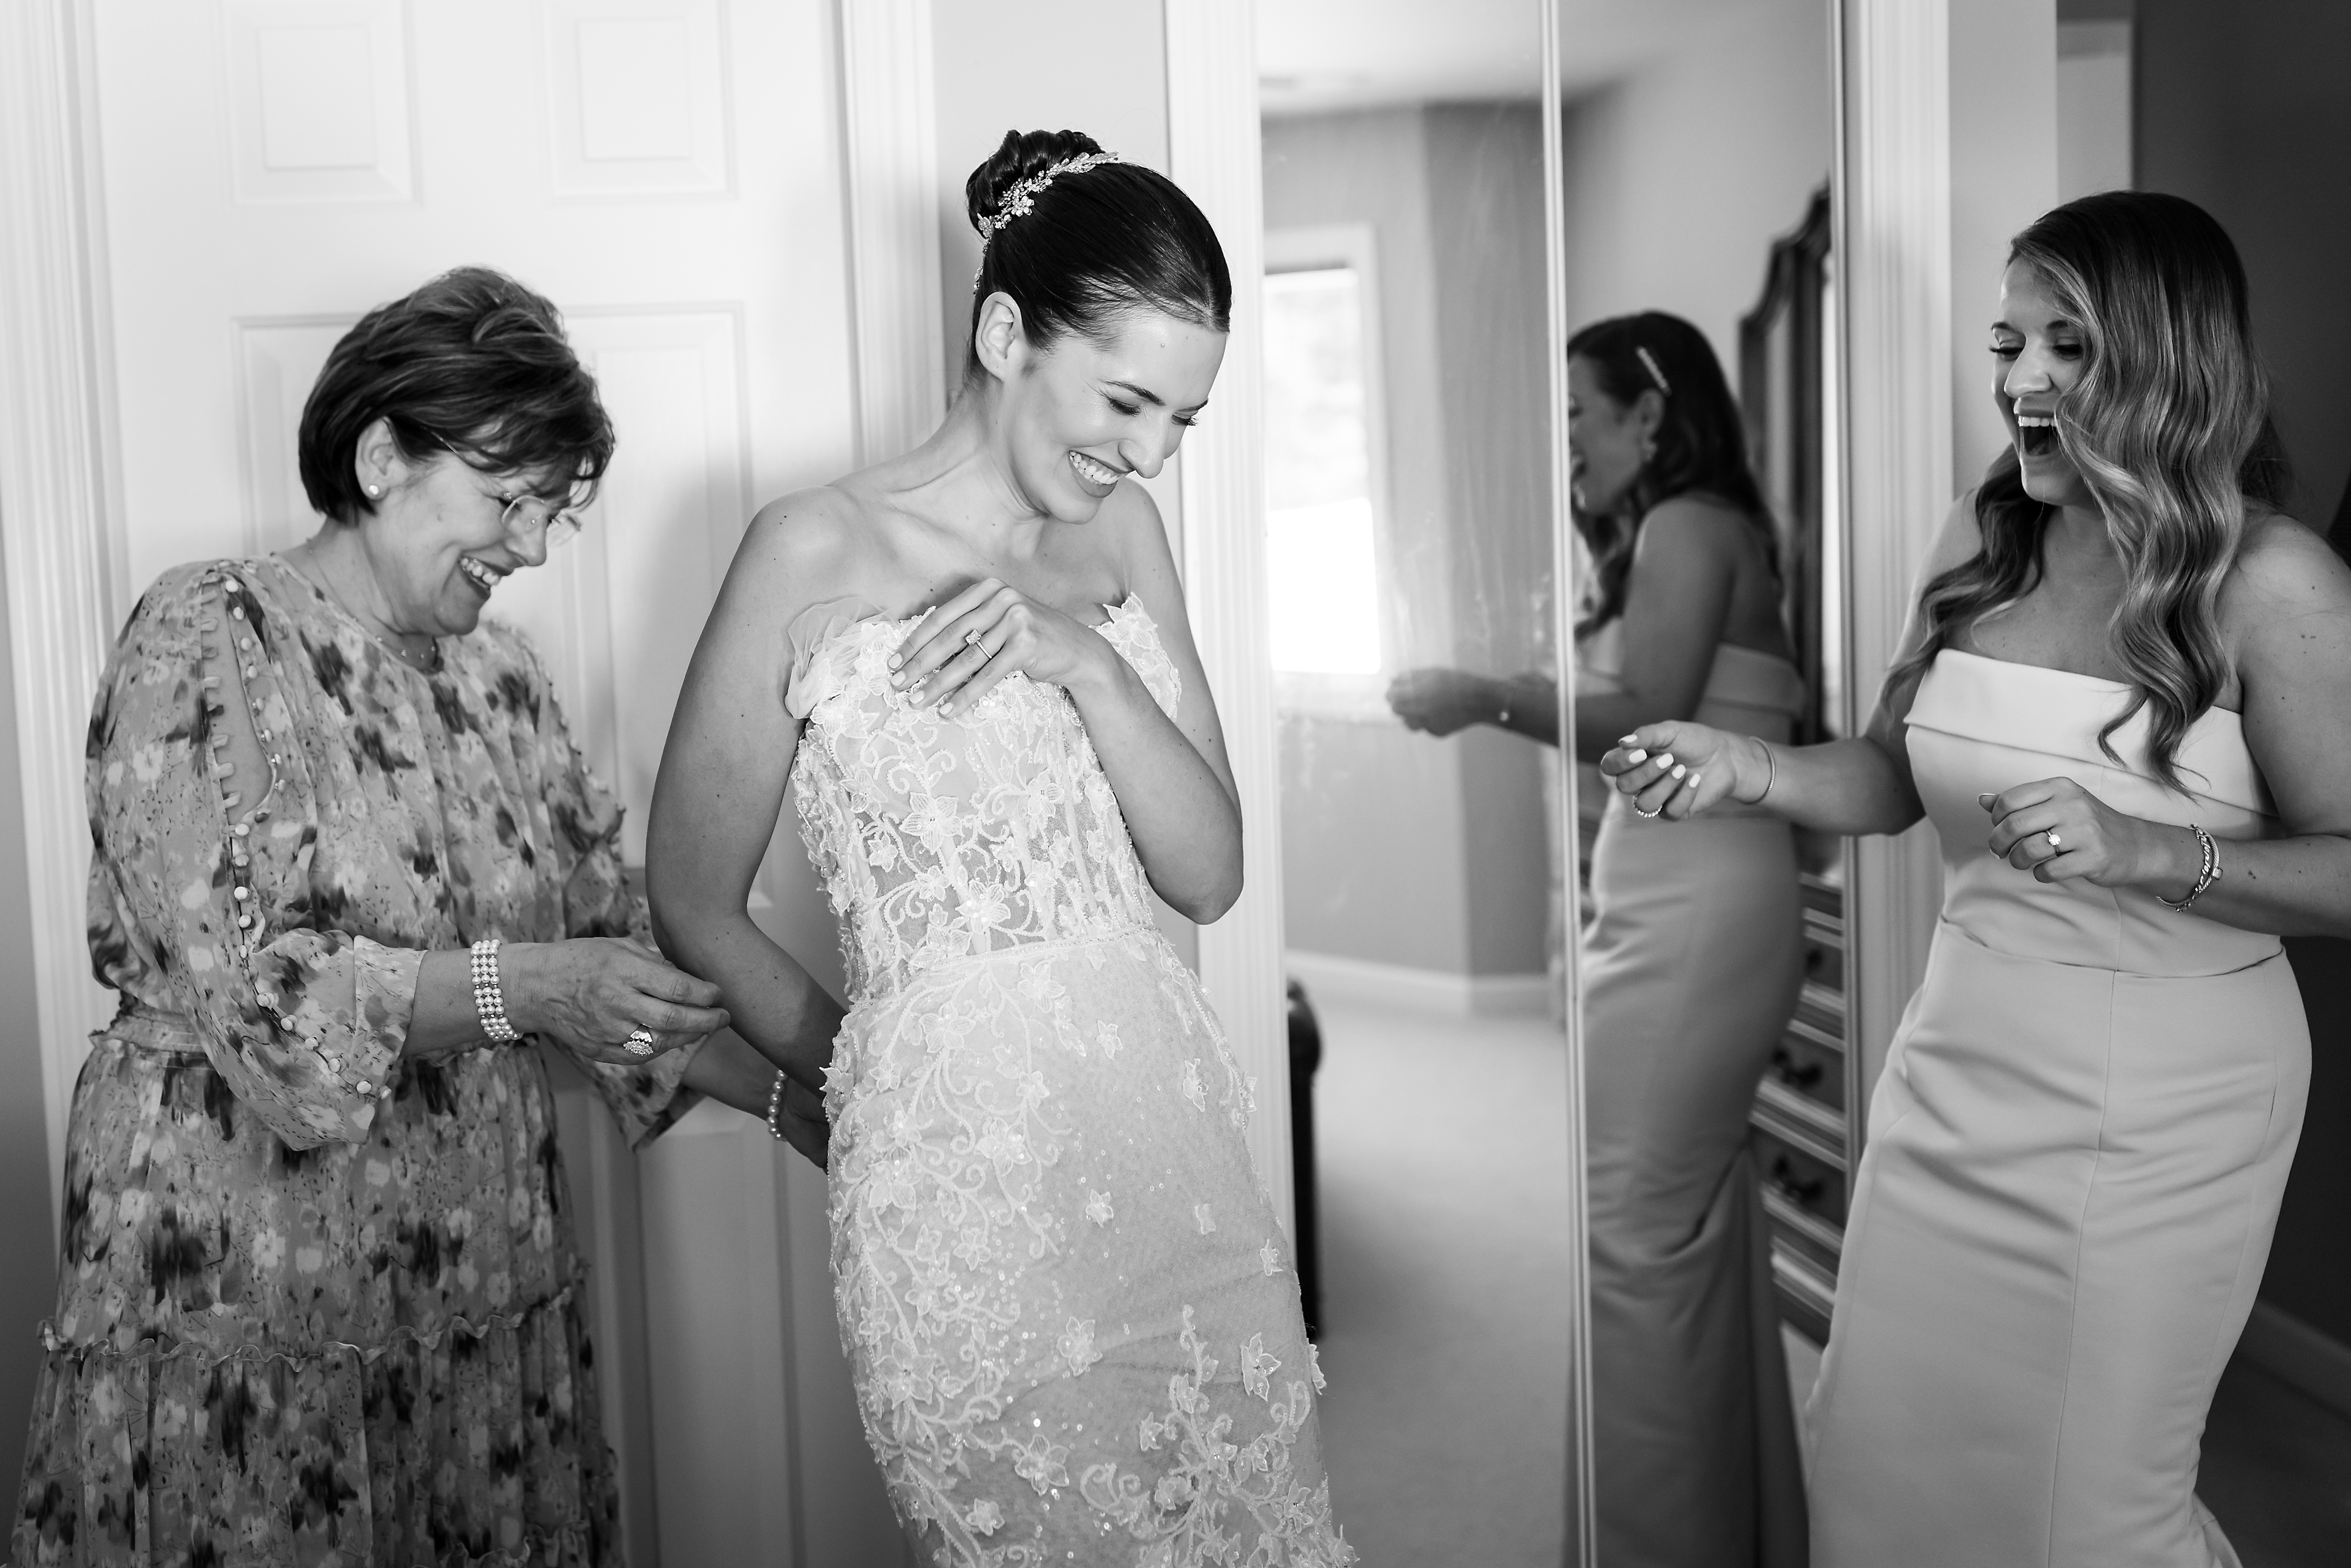 Mother and bridesmaid help bride put on wedding dress